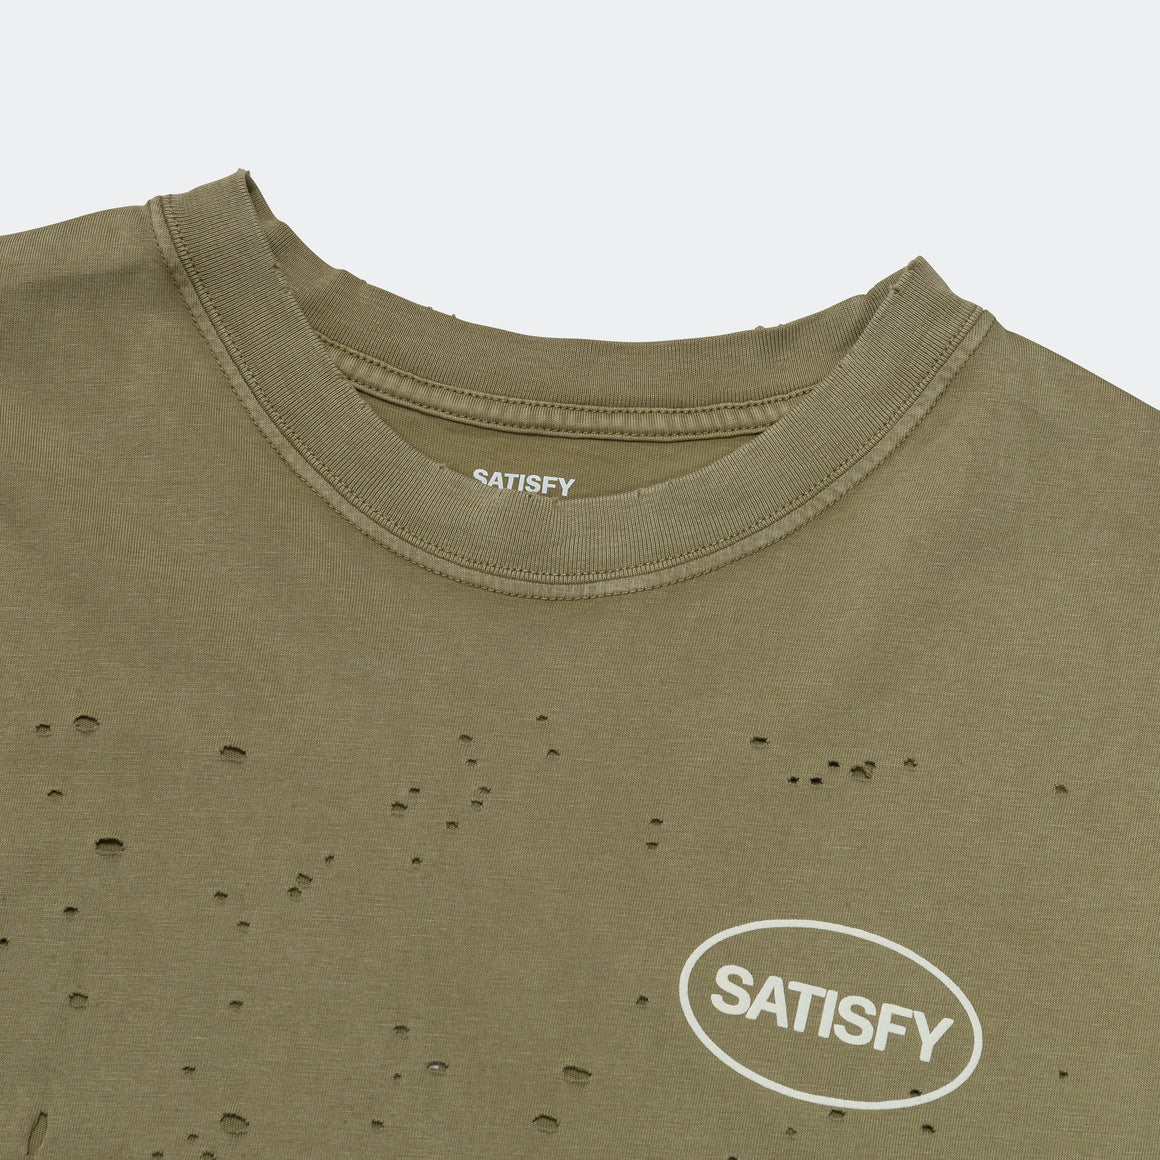 Satisfy - Mens MothTech™ T-Shirt - Aged Aloe - Up There Athletics